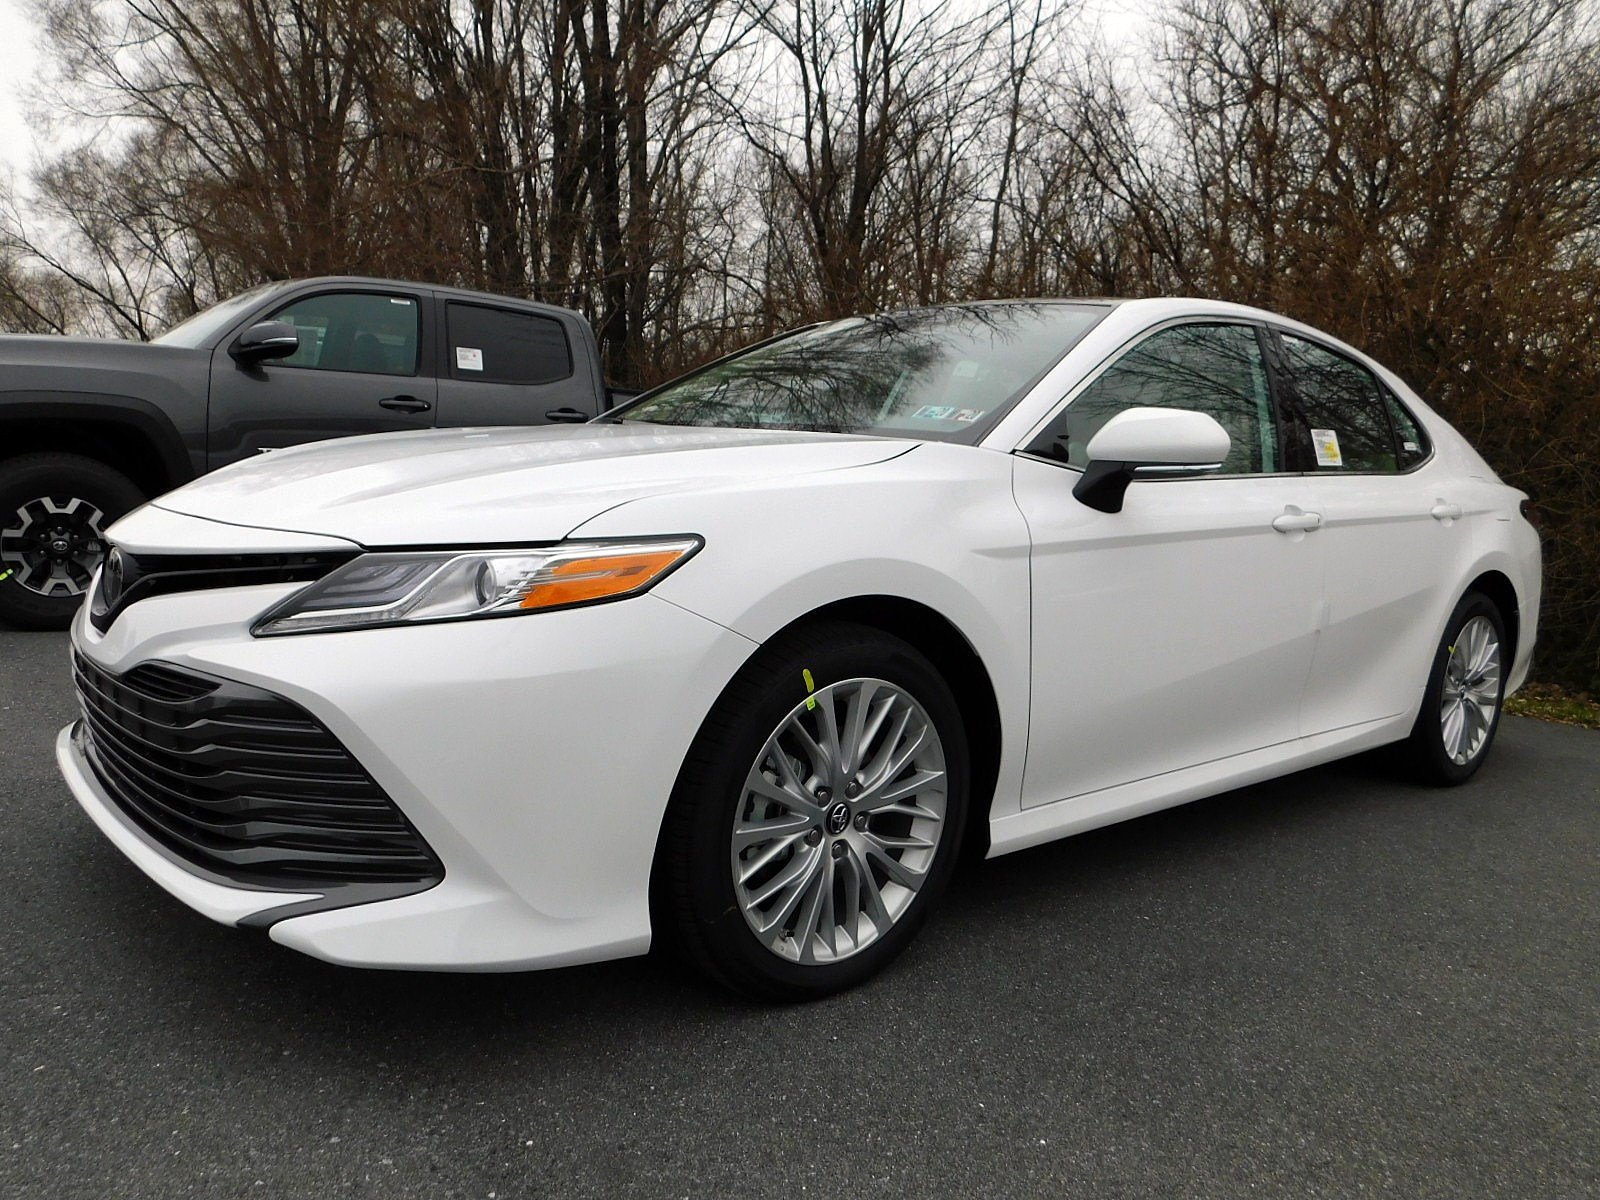 New 2019 Toyota Camry XLE V6 4dr Car in East Petersburg 12036